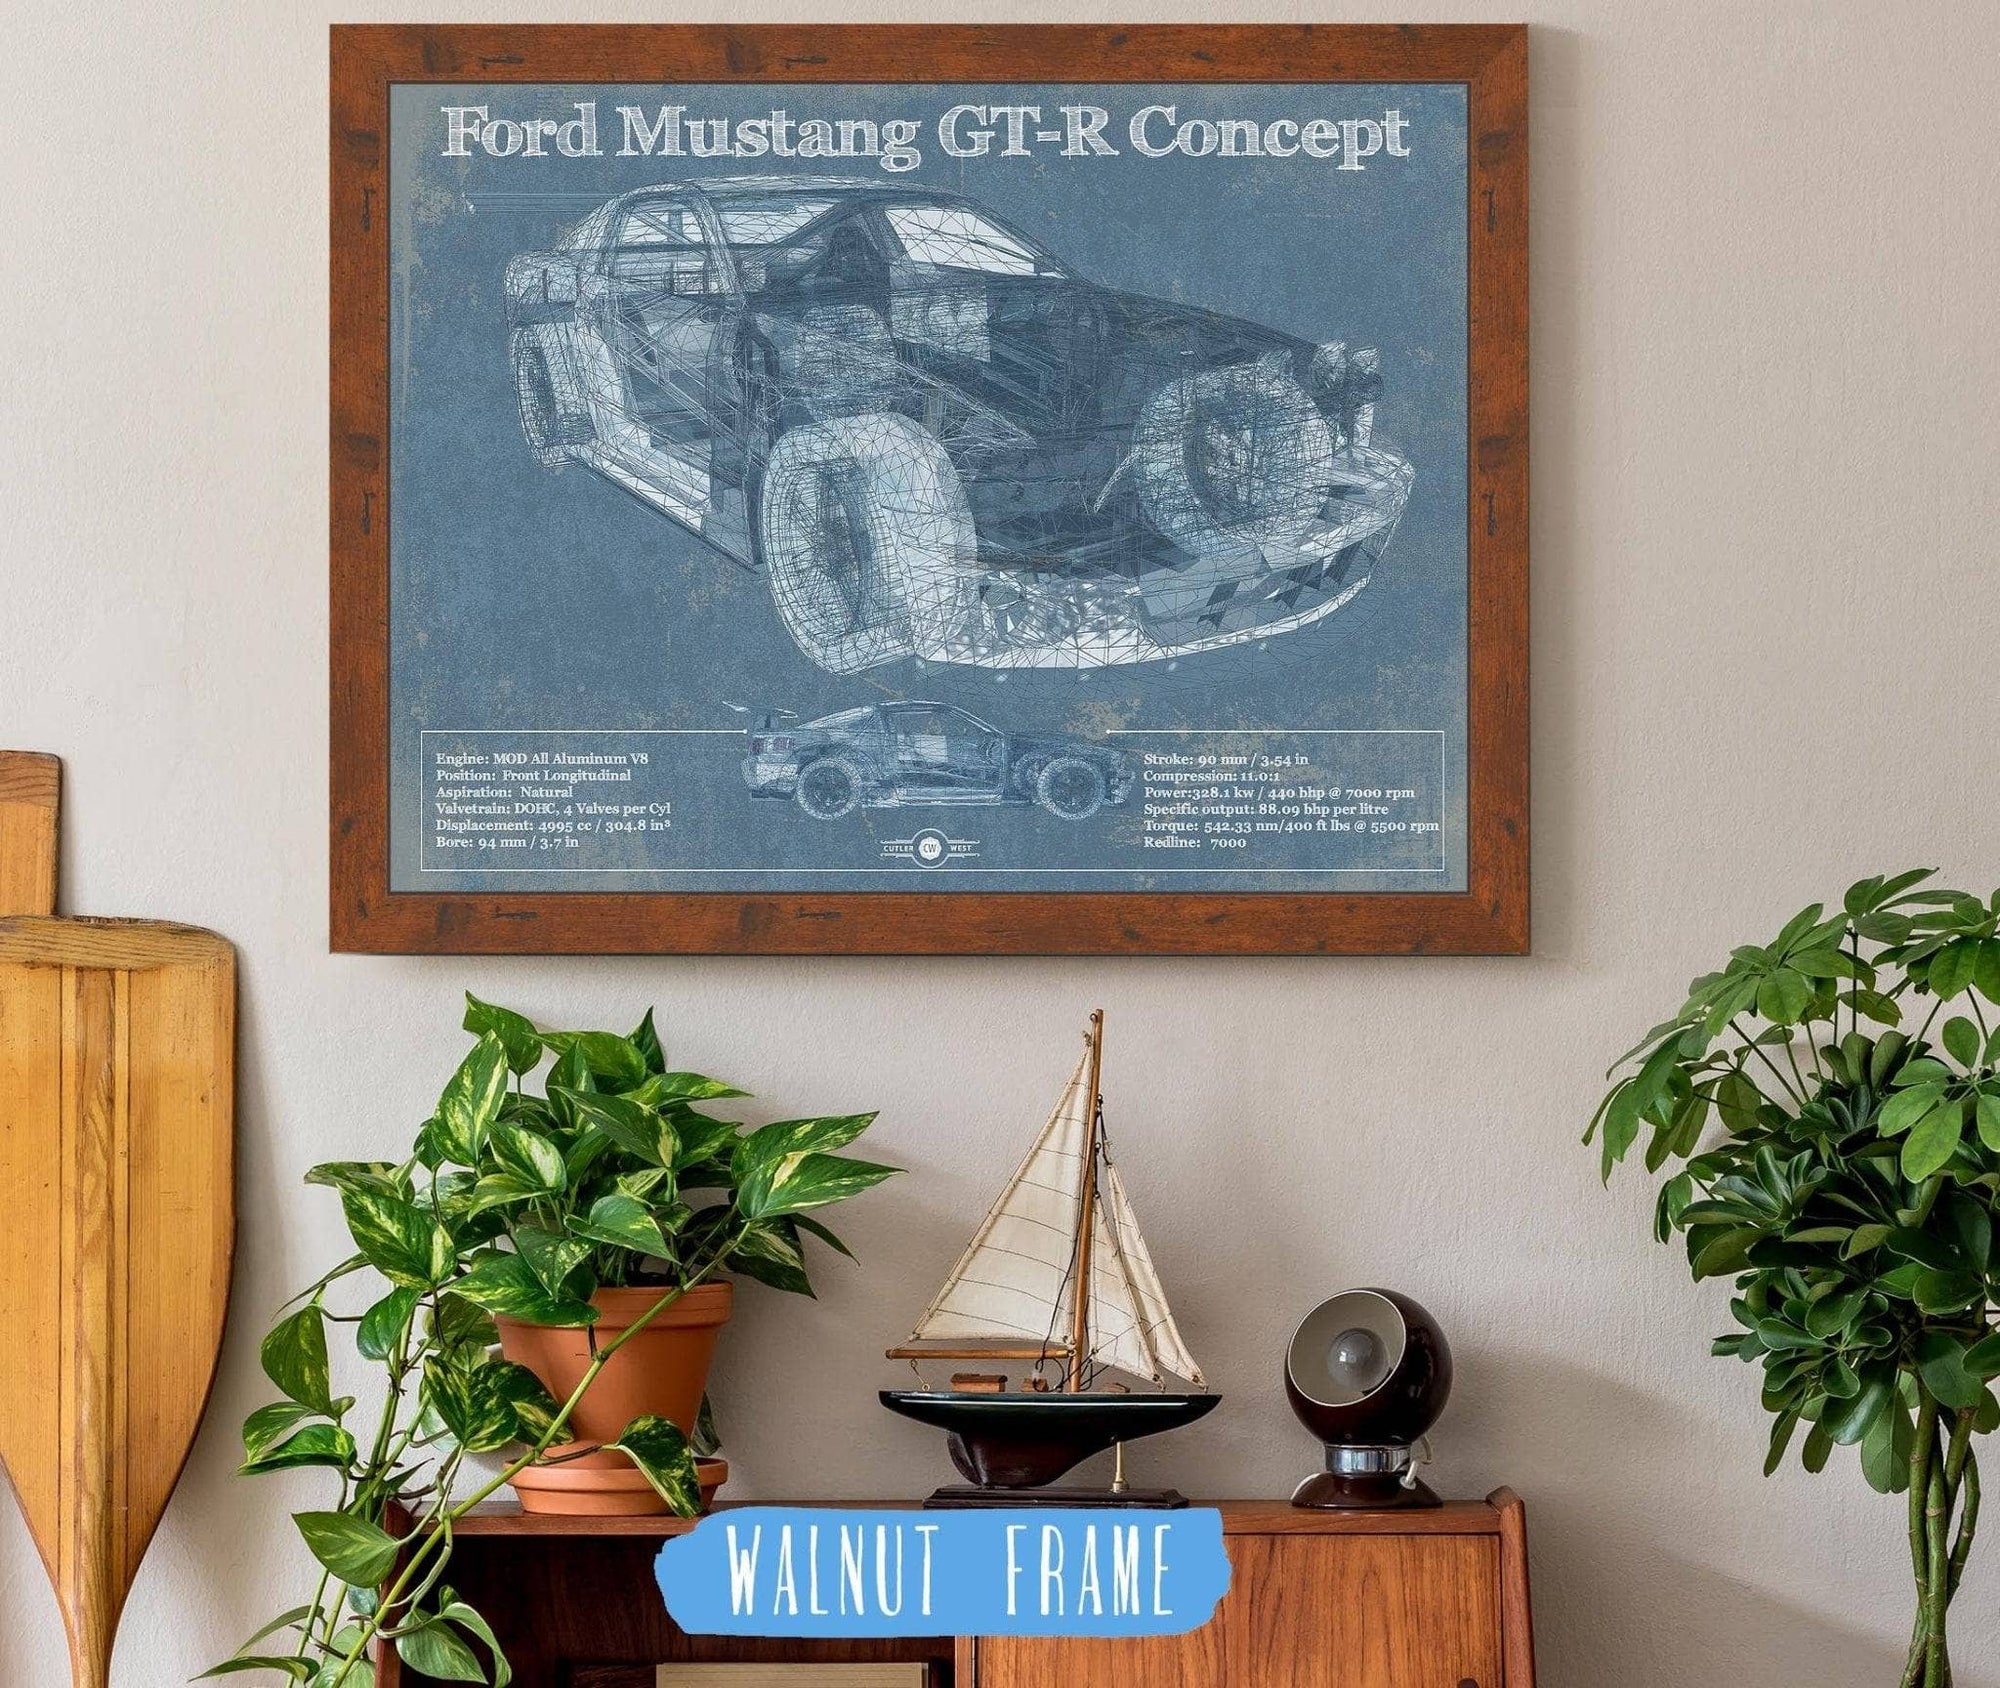 Cutler West Ford Collection 20" x 16" / Walnut Frame Ford Mustang GT-R Concept Race Car Print 787605402_21840